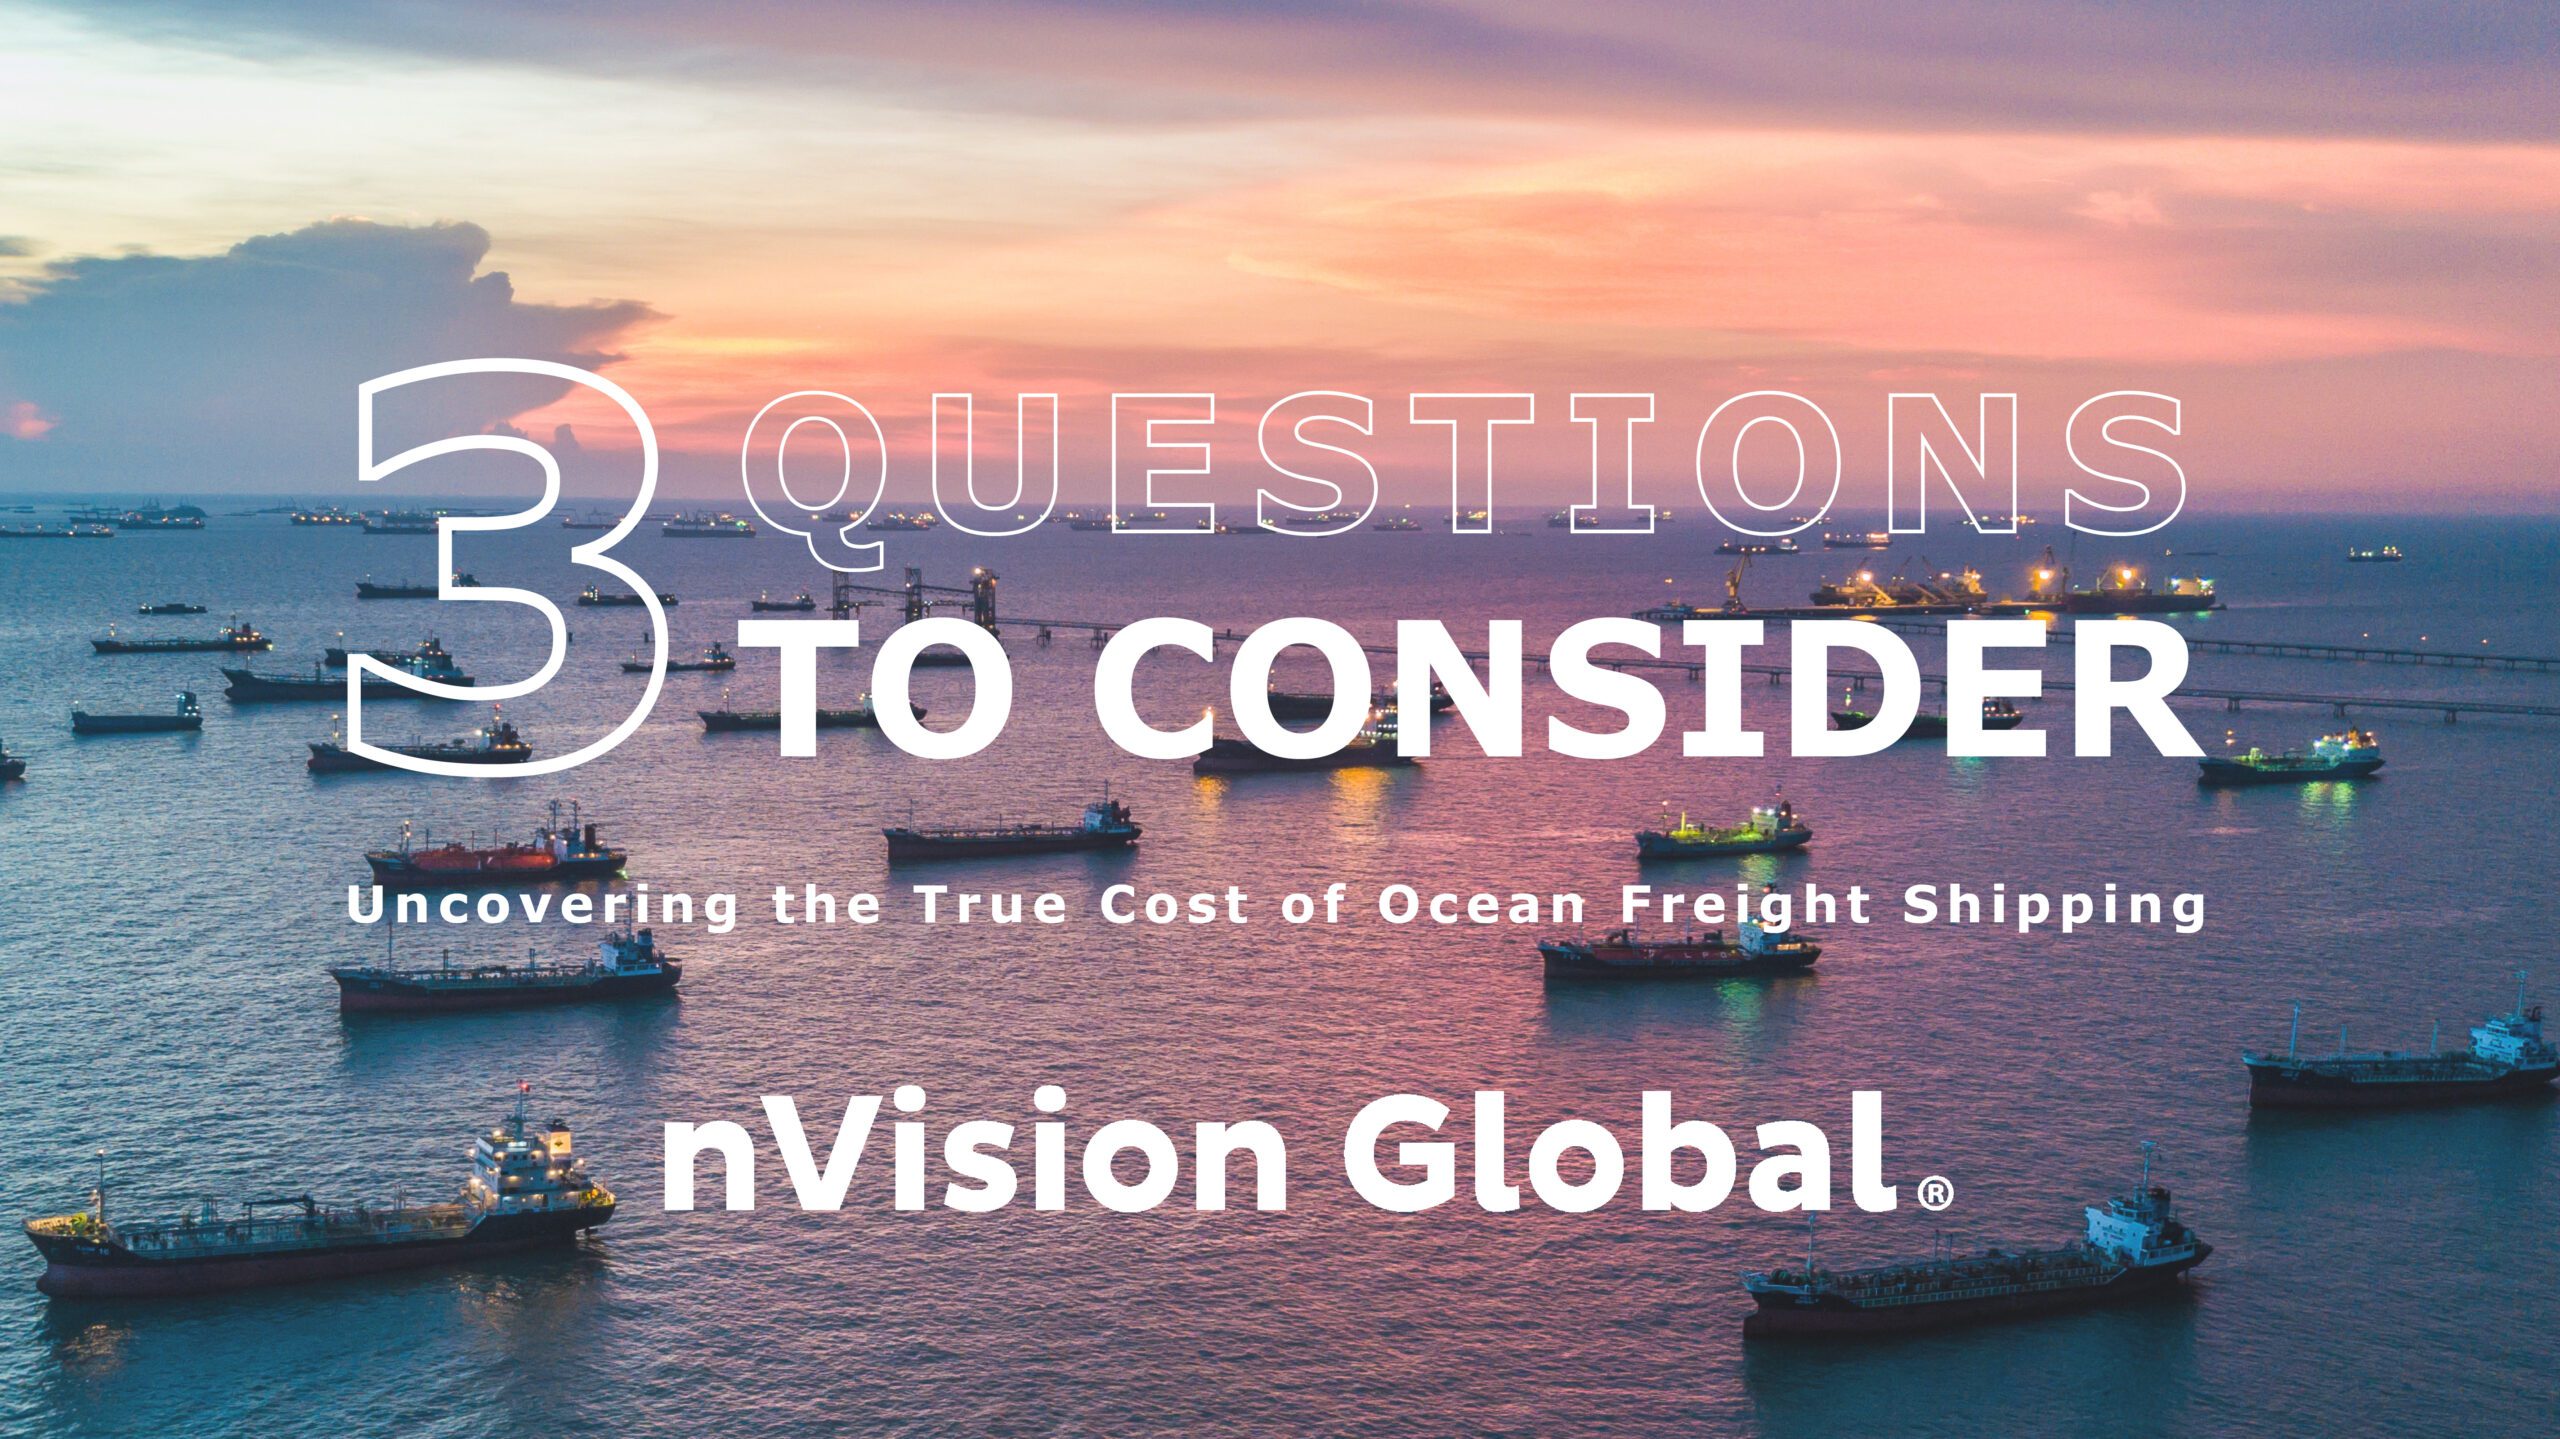 Uncovering the True Cost of Ocean Freight Shipping